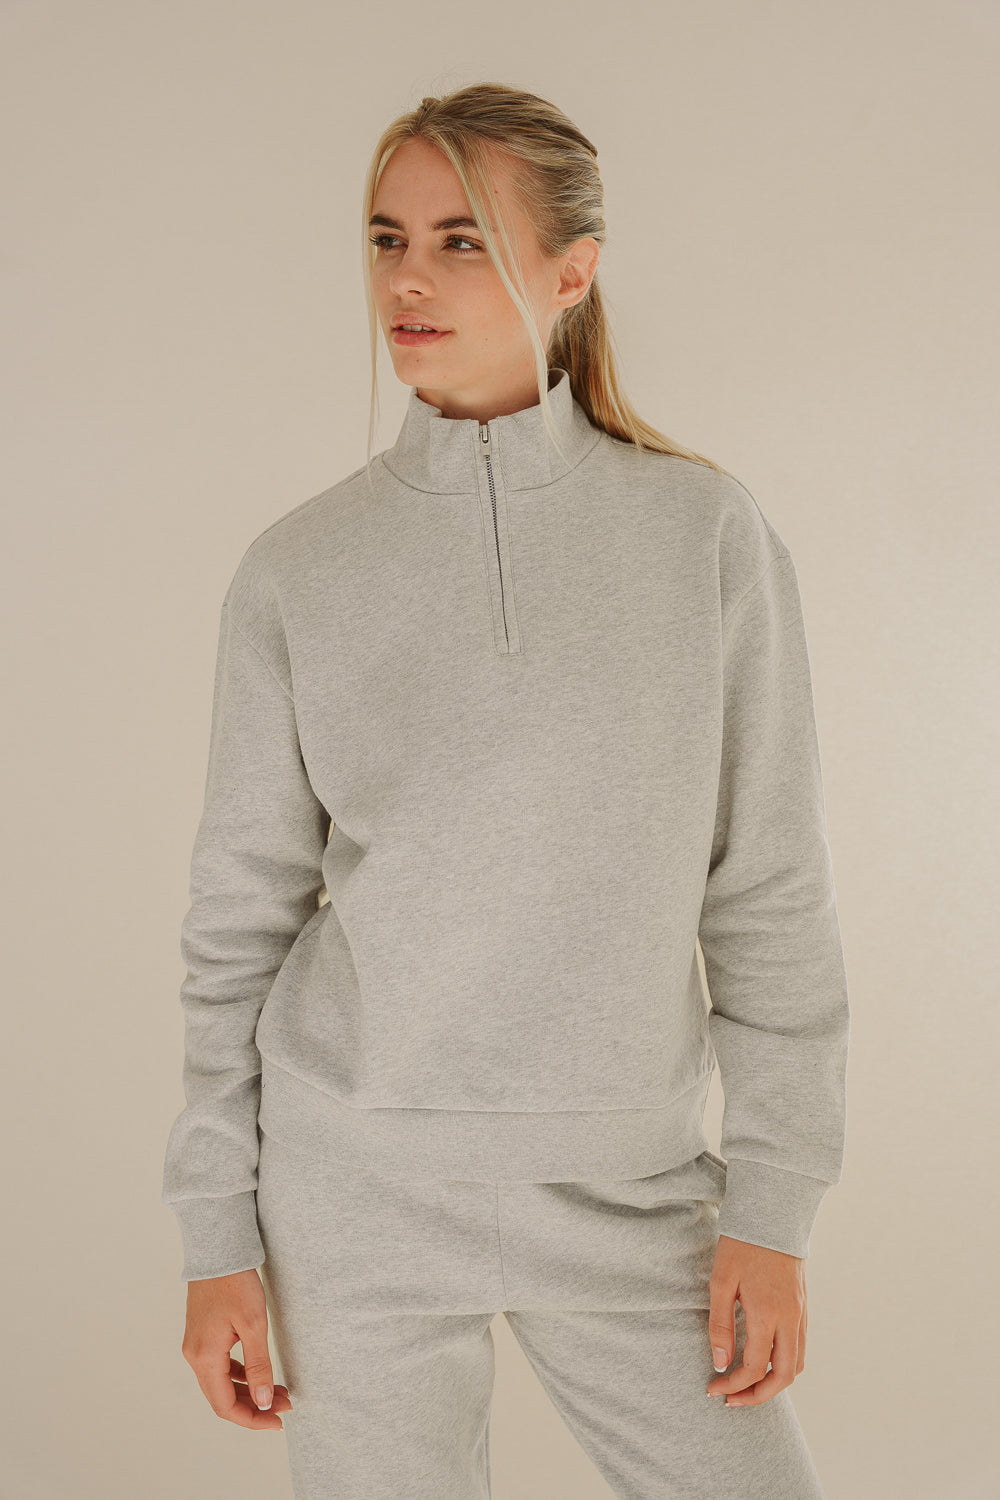 Light grey sweater made from 100% organic cotton by Pura Clothing